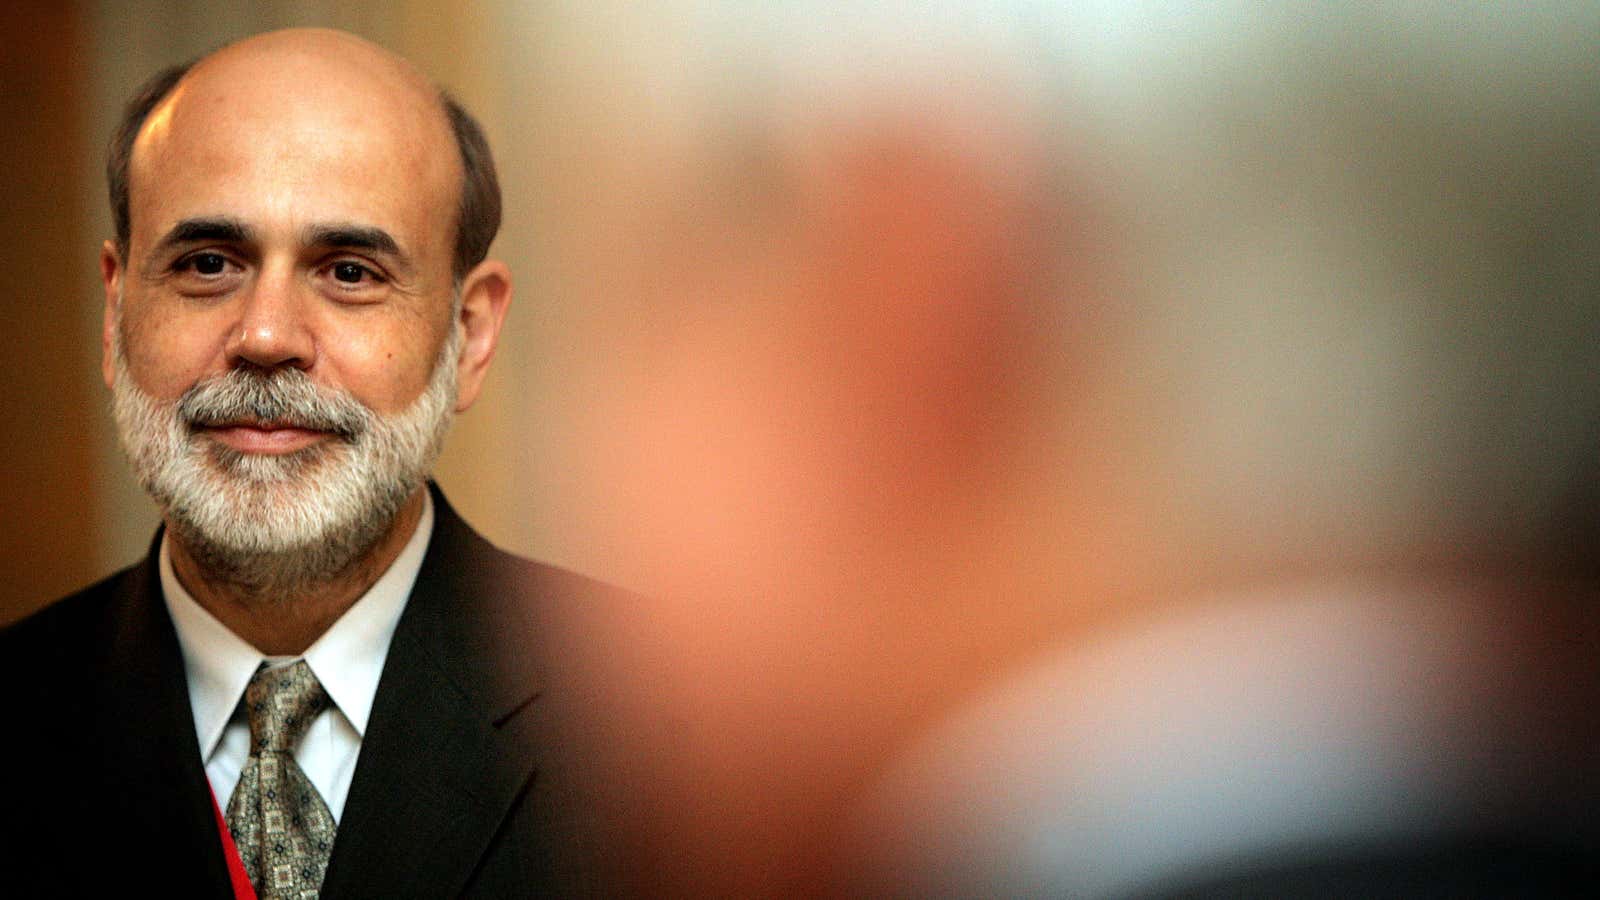 Federal Reserve Chairman Ben Bernanke must be pleased his plans are working.